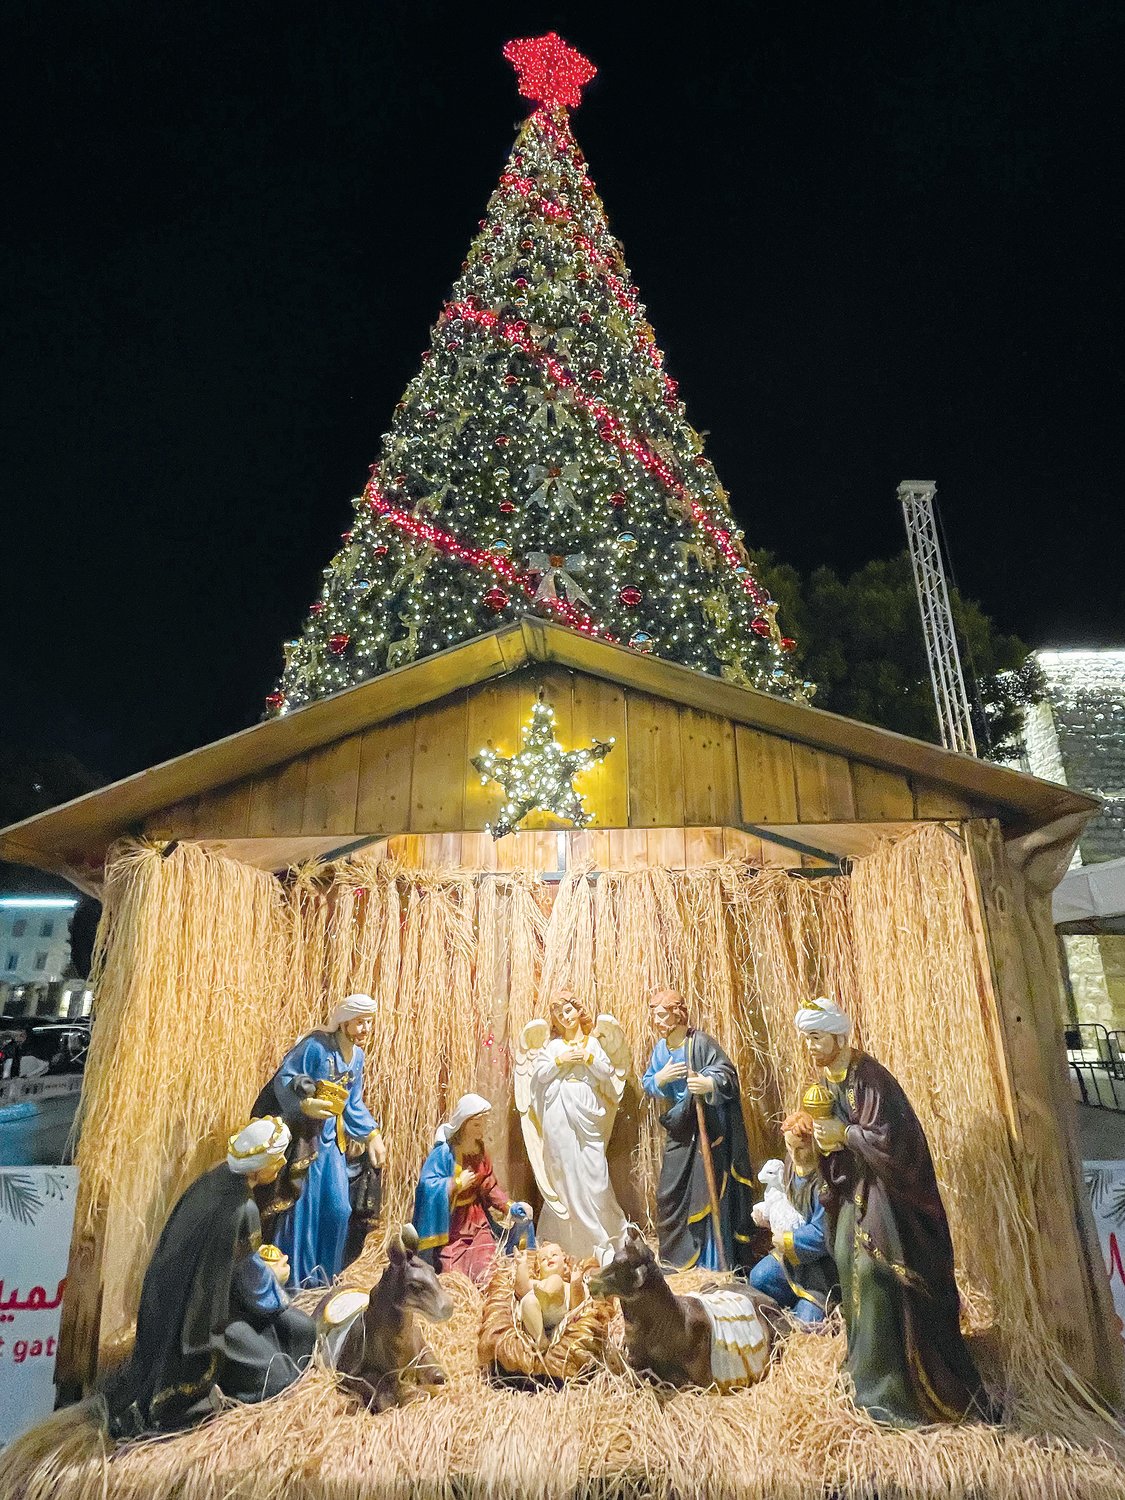 A 36-foot-tall illuminated and brilliantly decorated Christmas tree adorned with a red star serves as the focal point in Manger Square in Bethlehem.